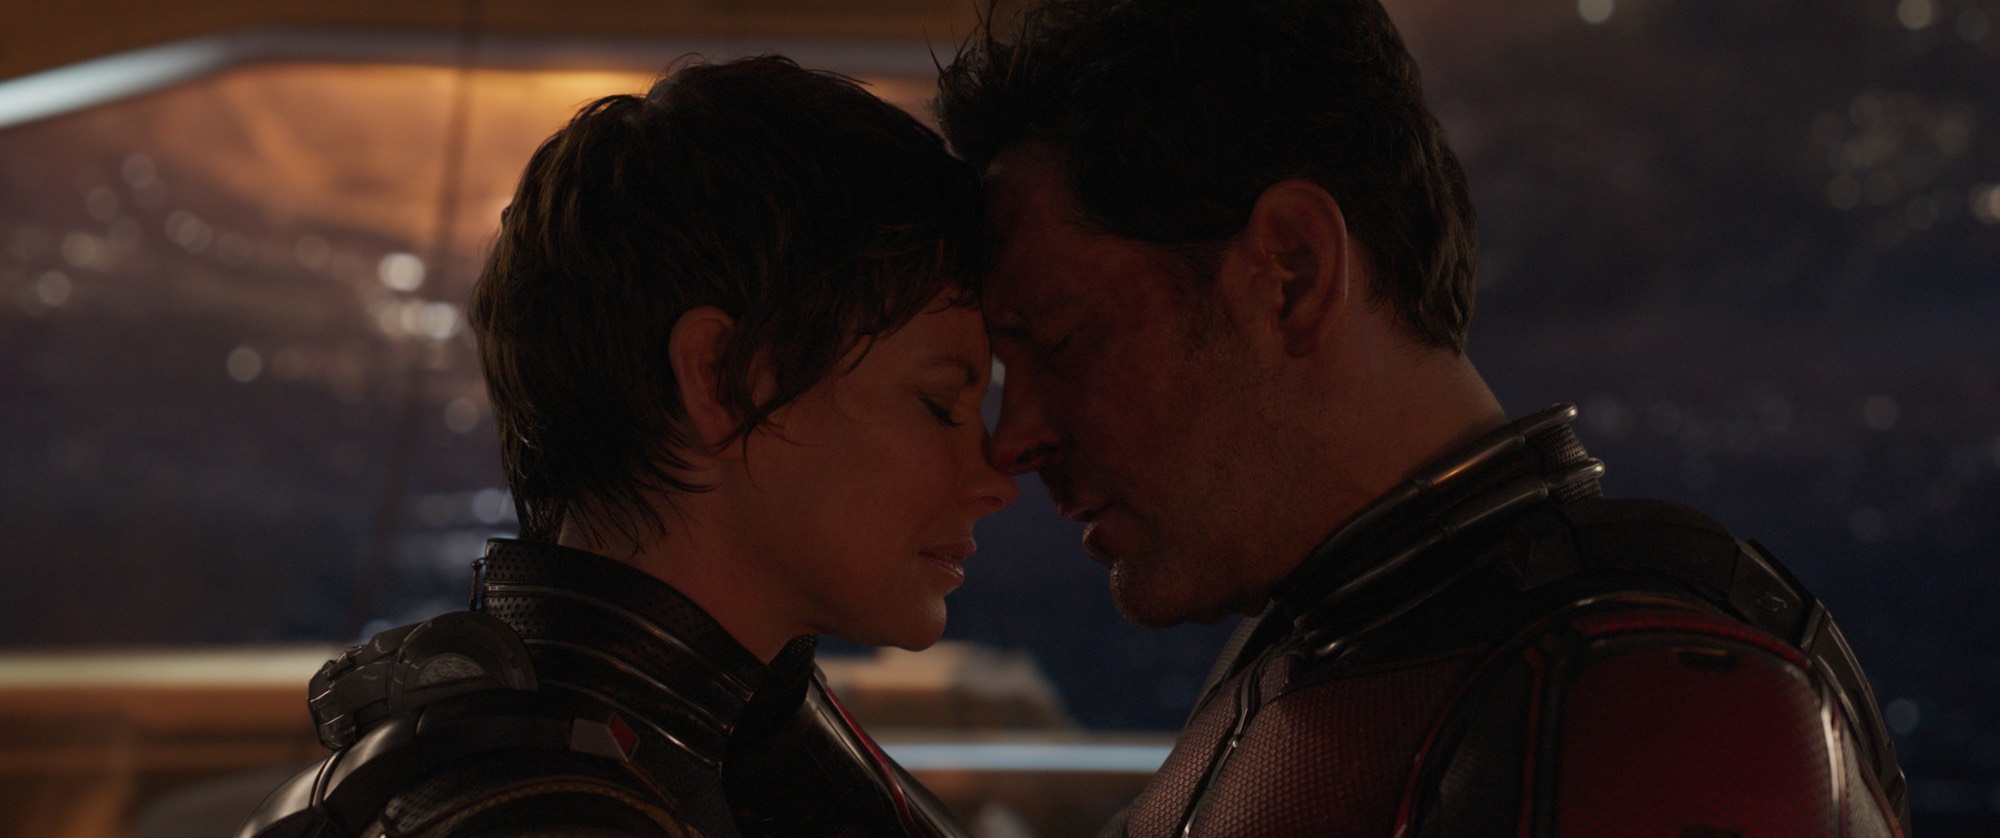 'Ant-Man and the Wasp: Quantumania' Evangeline Lilly as Hope Van Dyne and Paul Rudd as Scott Lang with their foreheads pressed against each other's